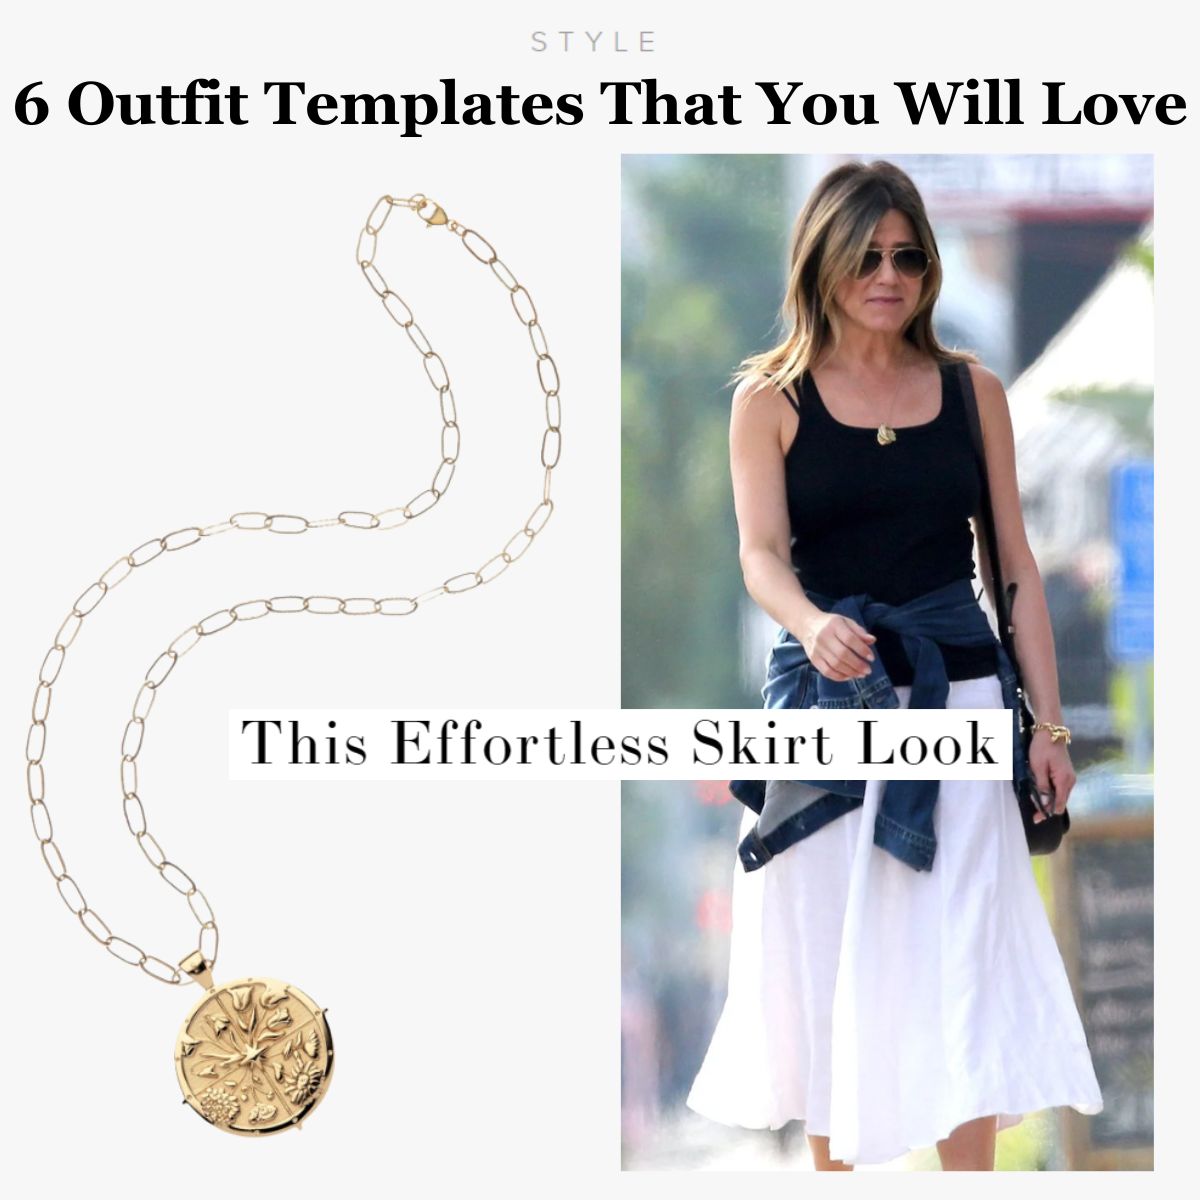 Press Highlight: The Candidly's "6 Outfit Templates That You Will Love"